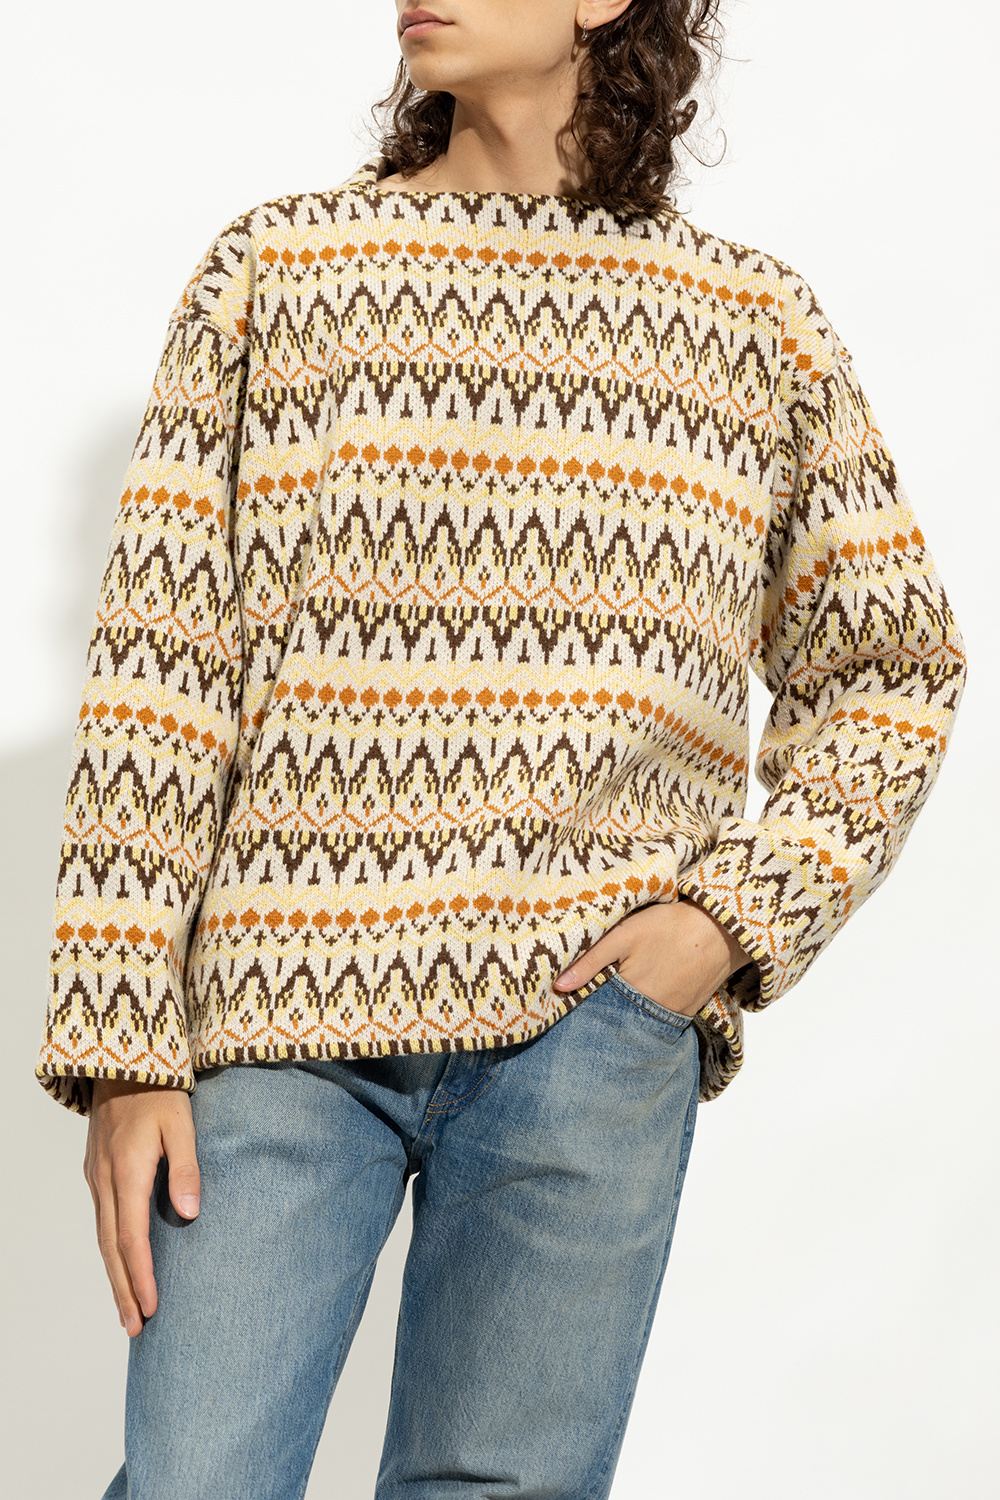 Levi's The ‘Vintage Clothing’ collection sweater